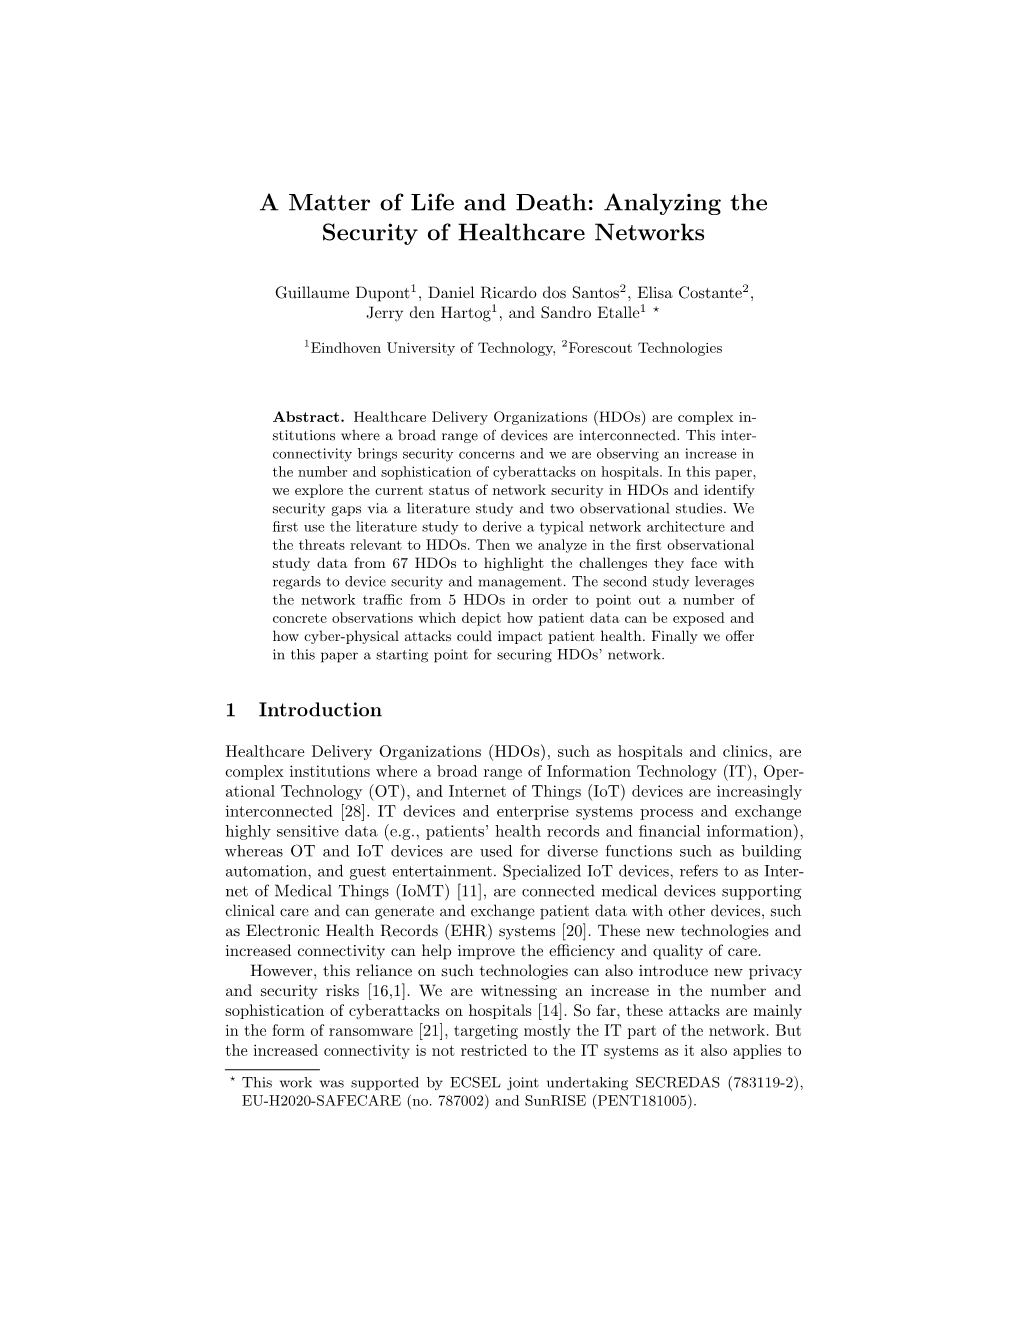 A Matter of Life and Death: Analyzing the Security of Healthcare Networks